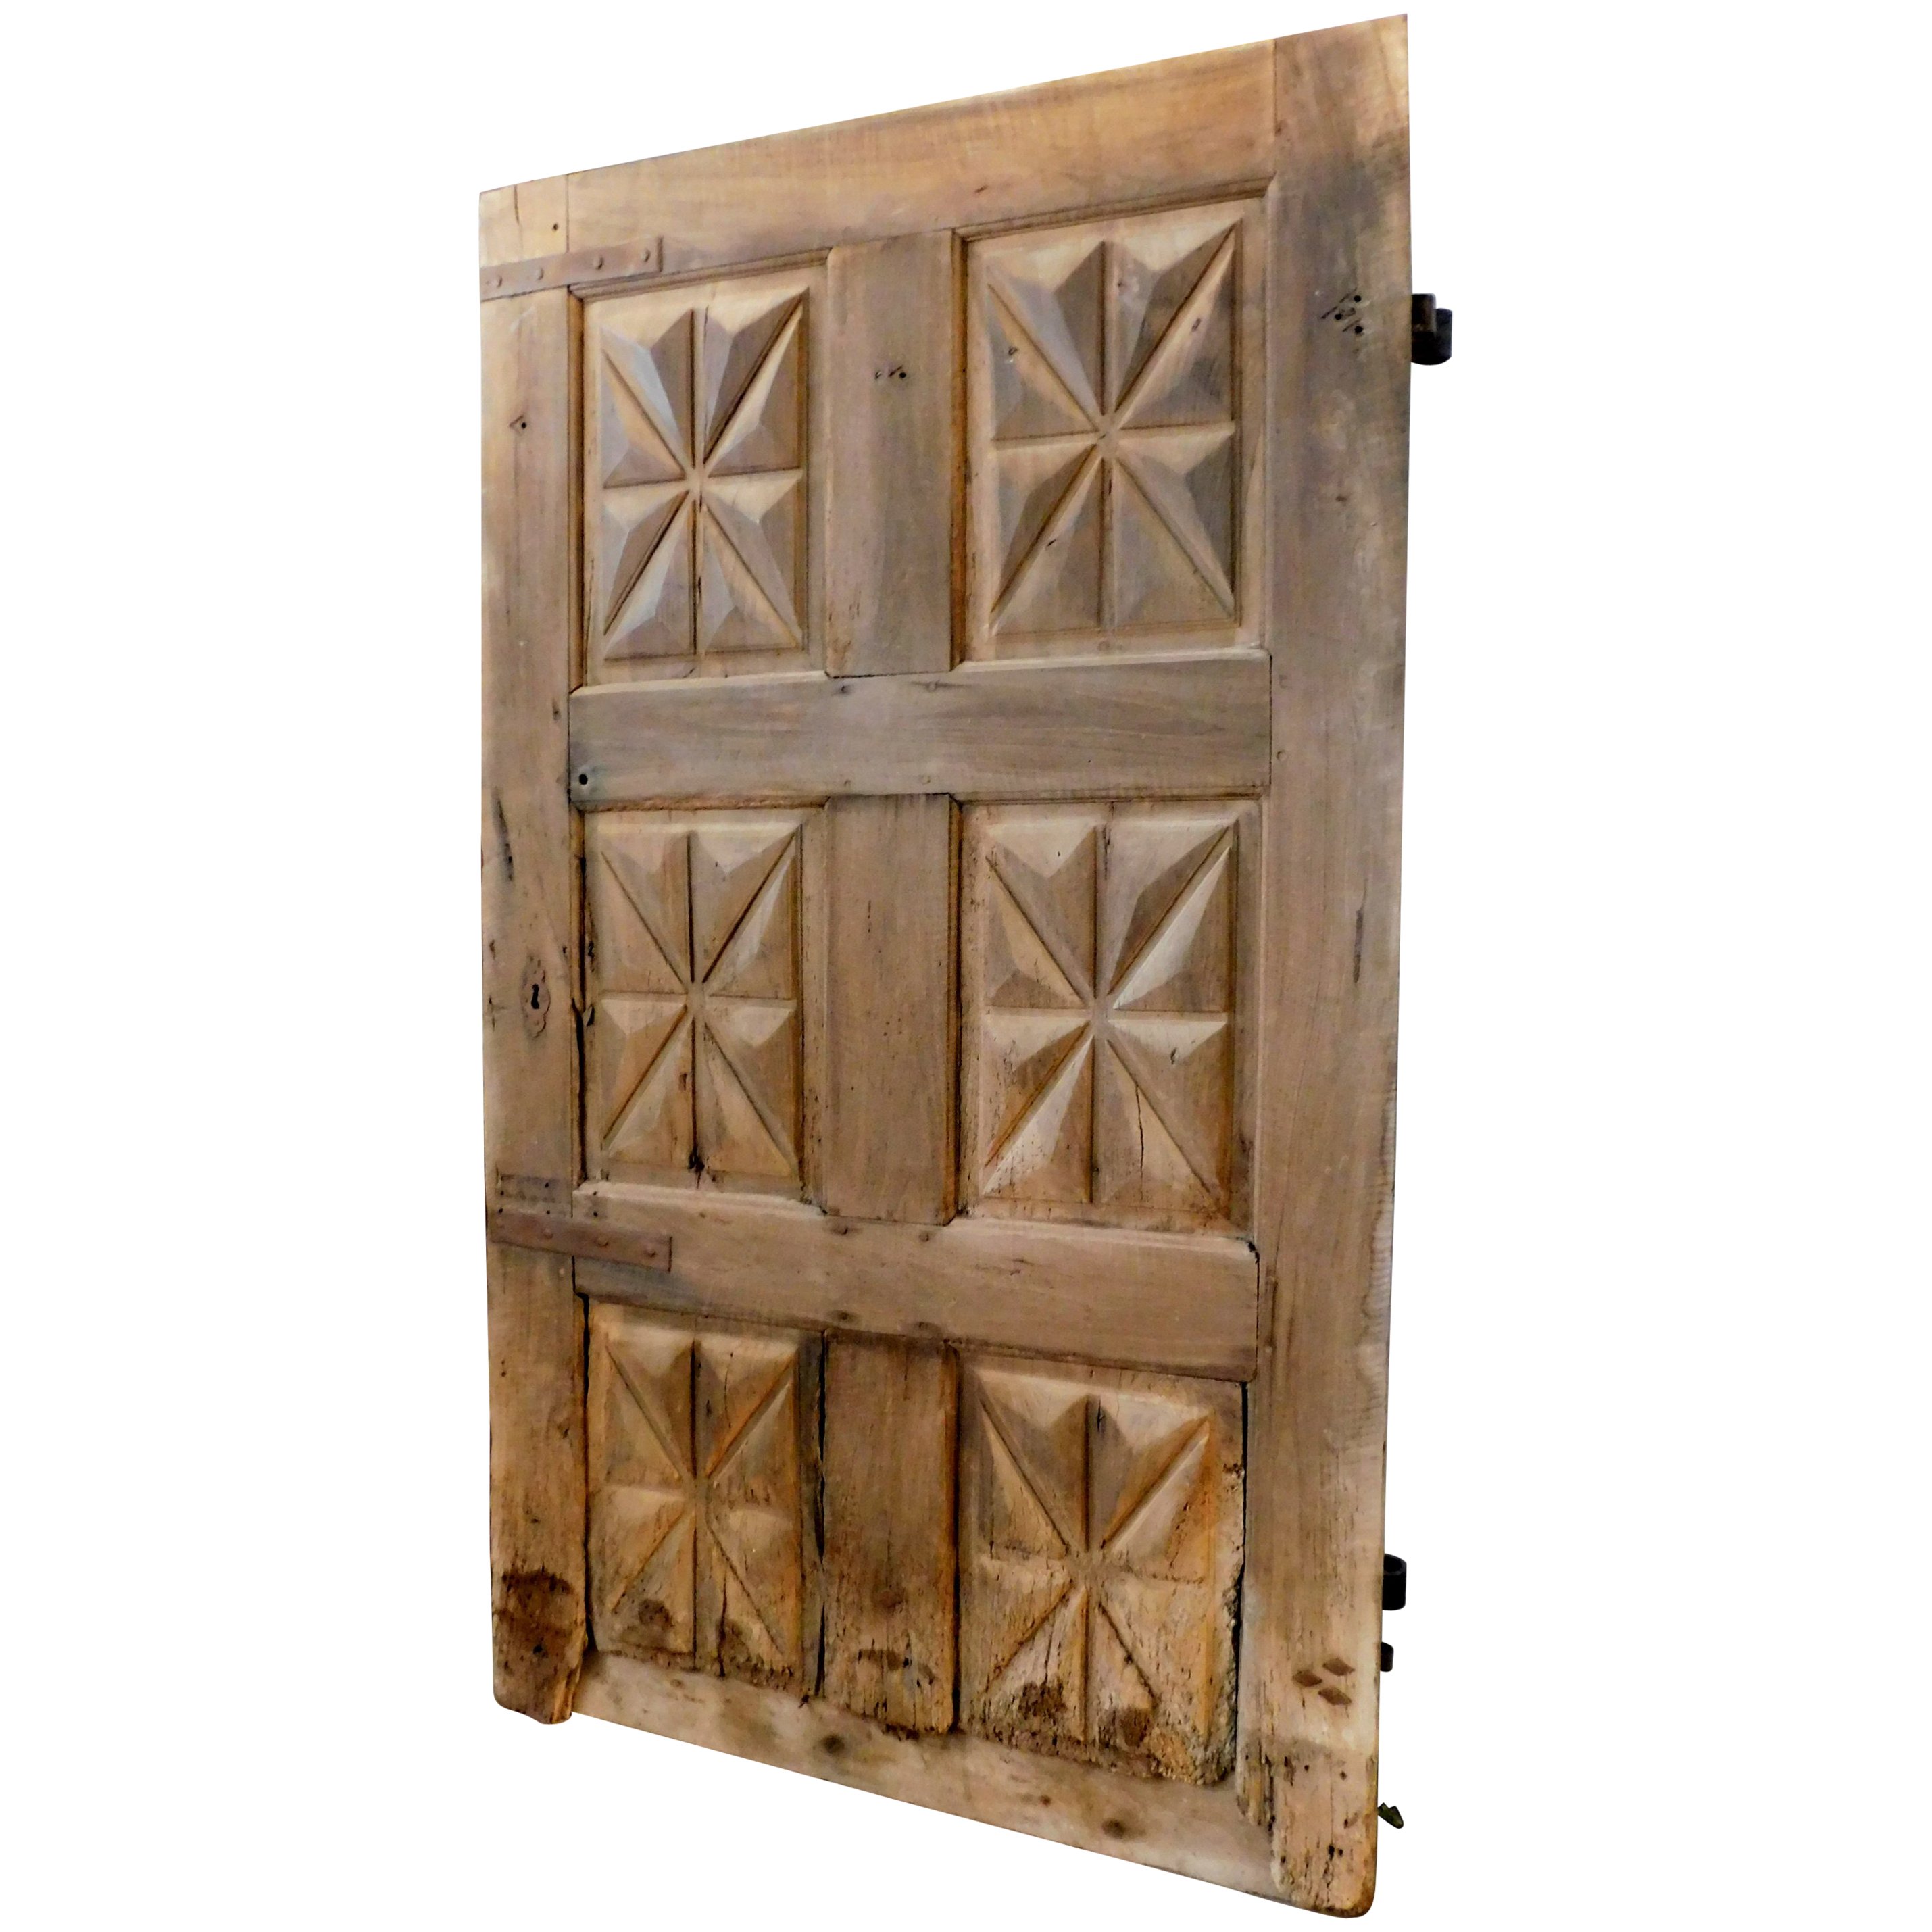 Set of Two 17th Century Walnut and Poplar Doors For Sale at 1stdibs